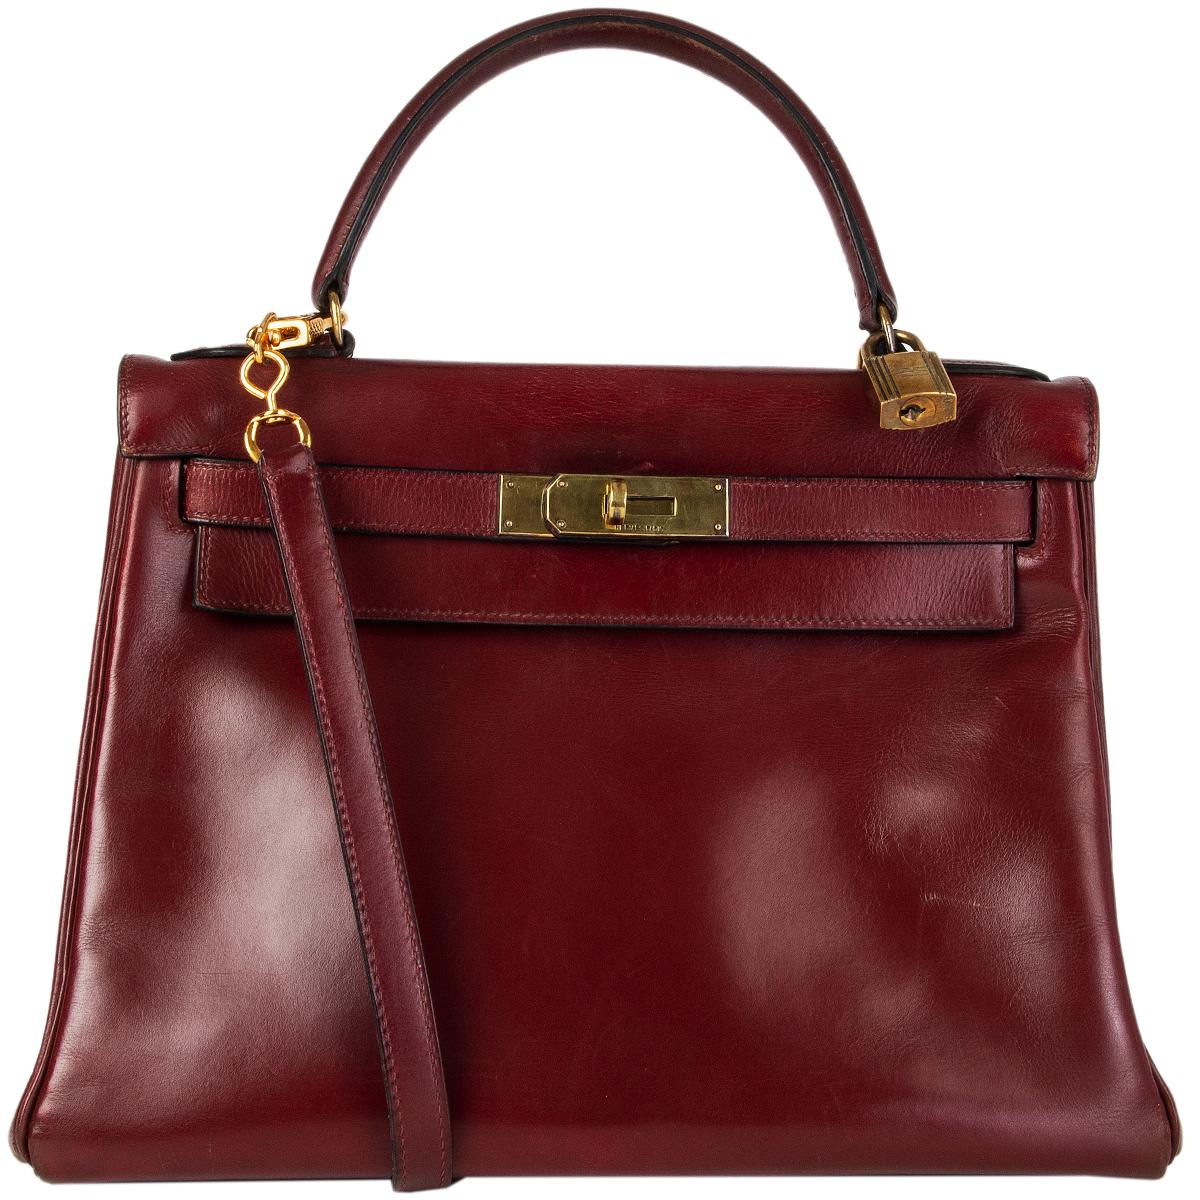 Hermès 'Kelly 28 Retourne' in burgundy Veau Box. Vintage 1970. Lined in Chevre (goat skin) with two open pockets against the front and a open pocket against the back. Has been carried with overall signs of use, wear to the bottom corners and faint